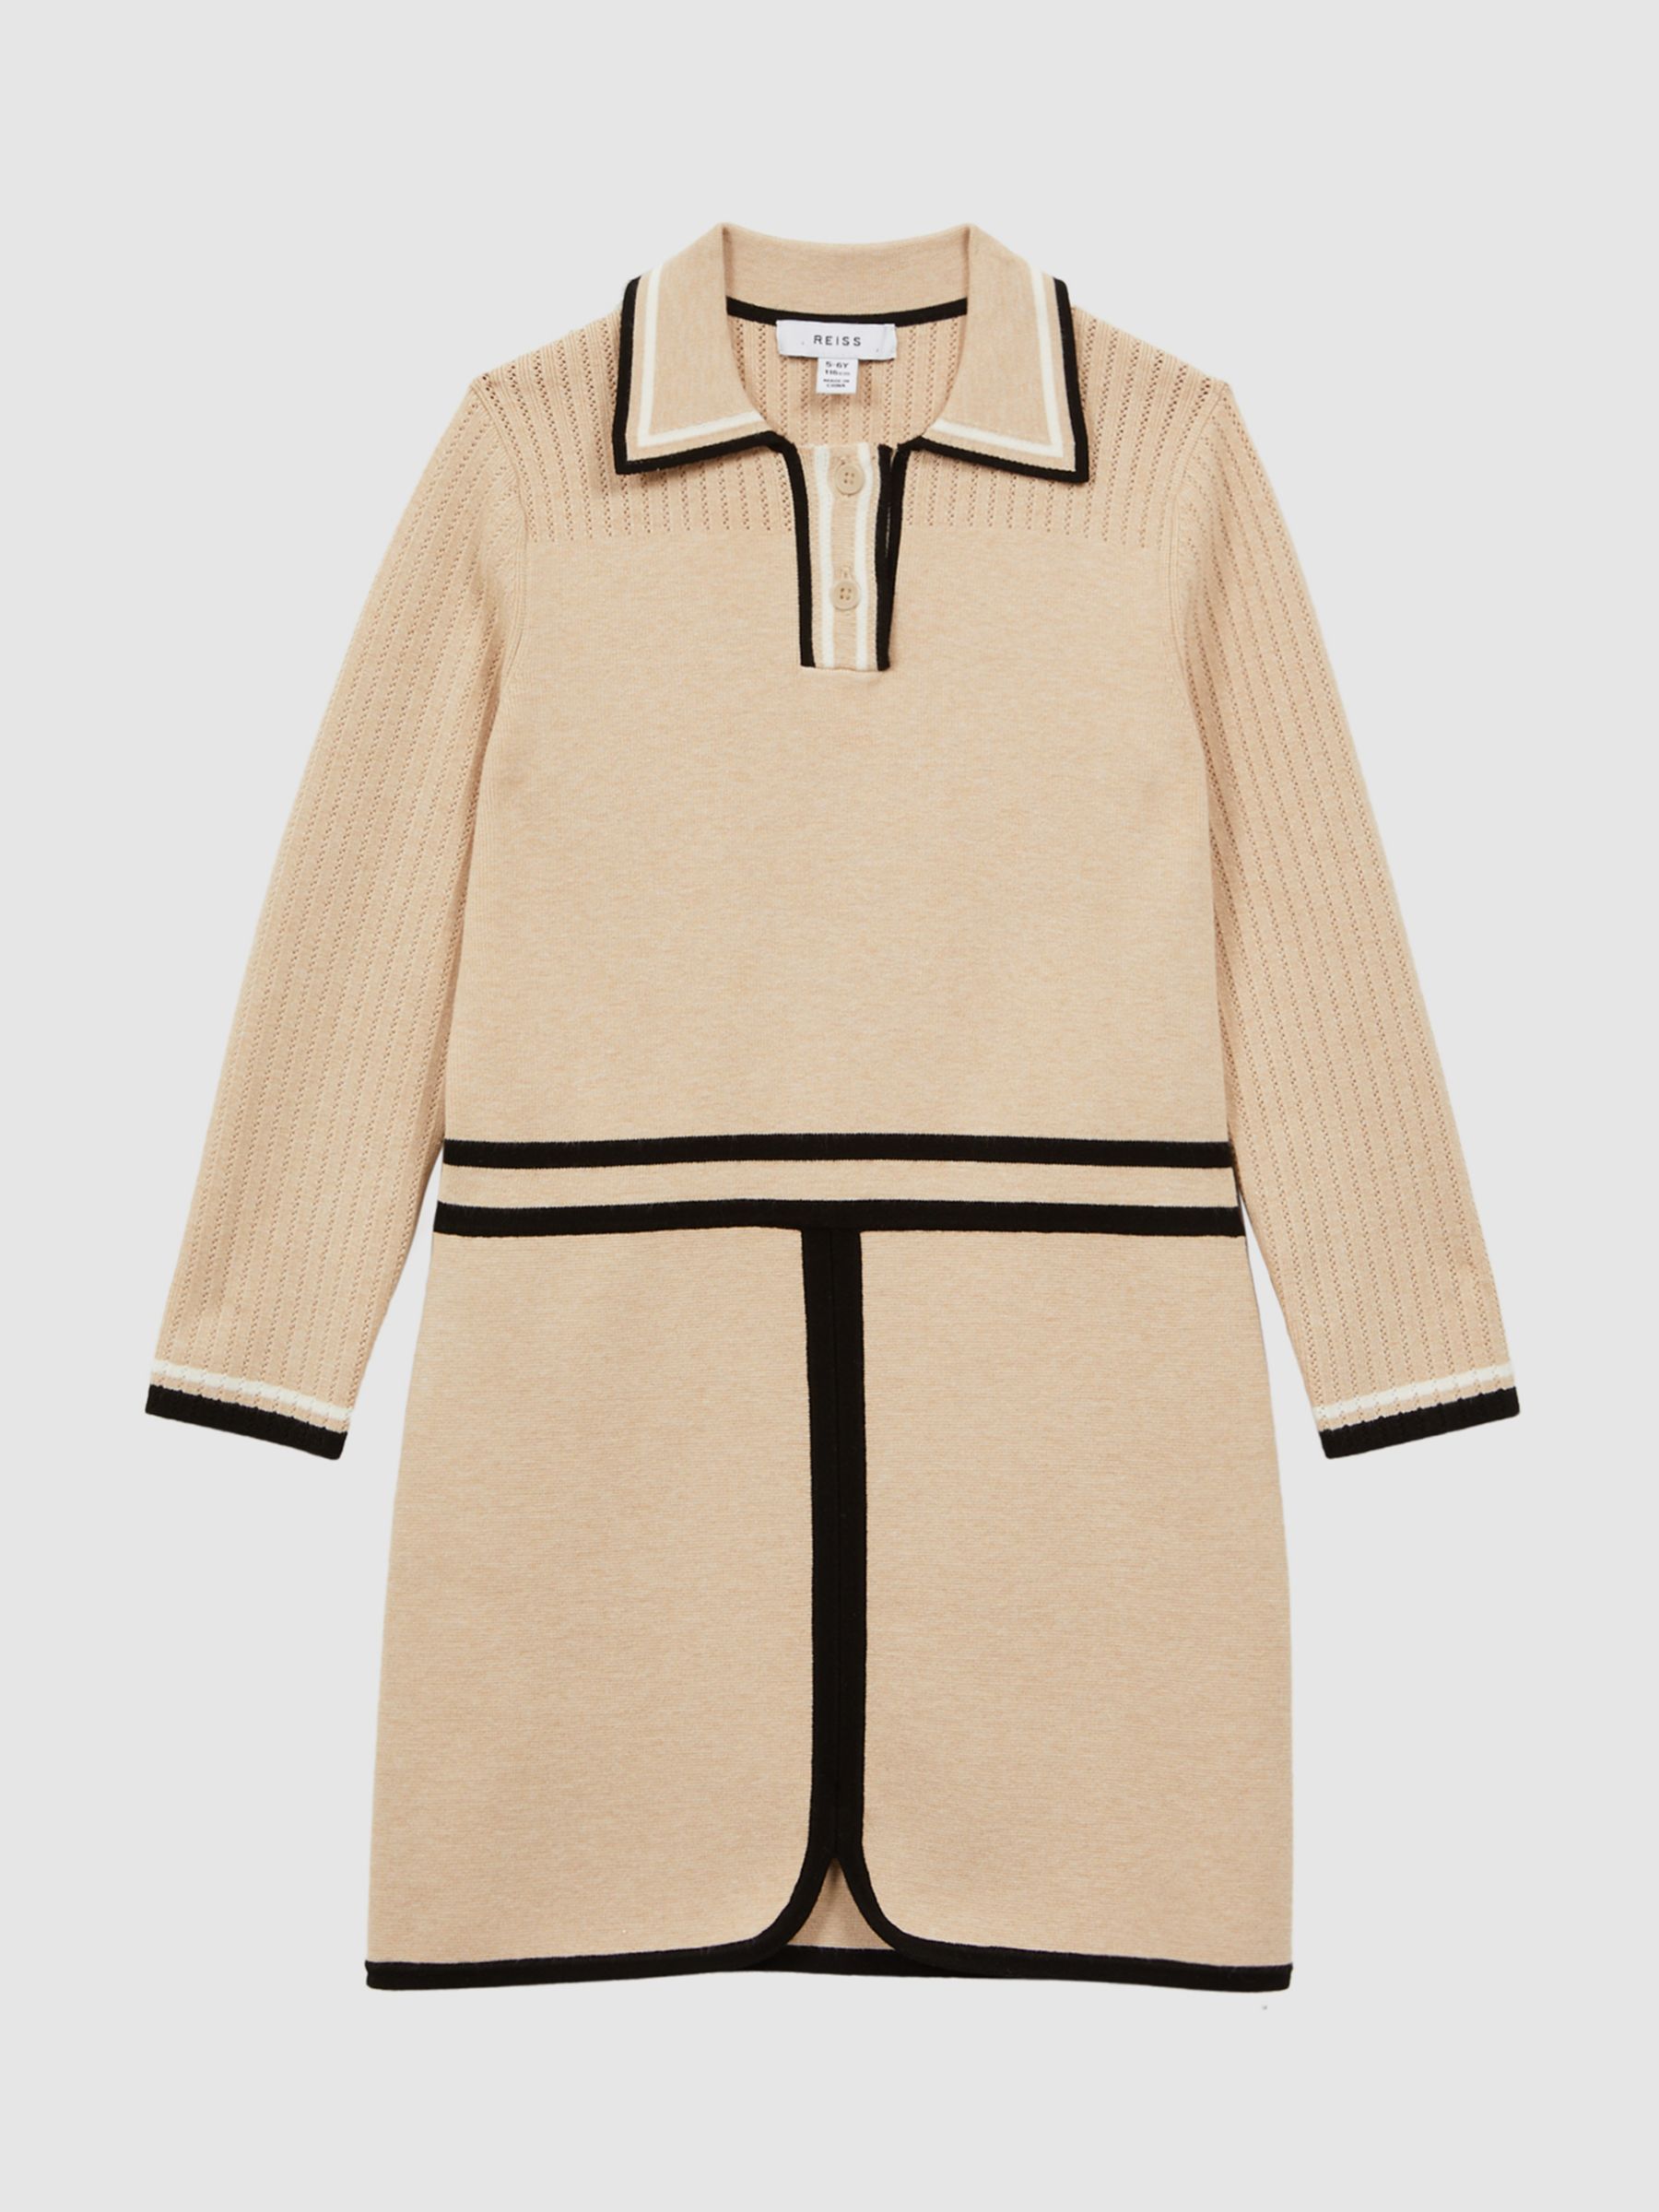 Reiss Kids' Ruby Knitted Polo Dress, Camel at John Lewis & Partners